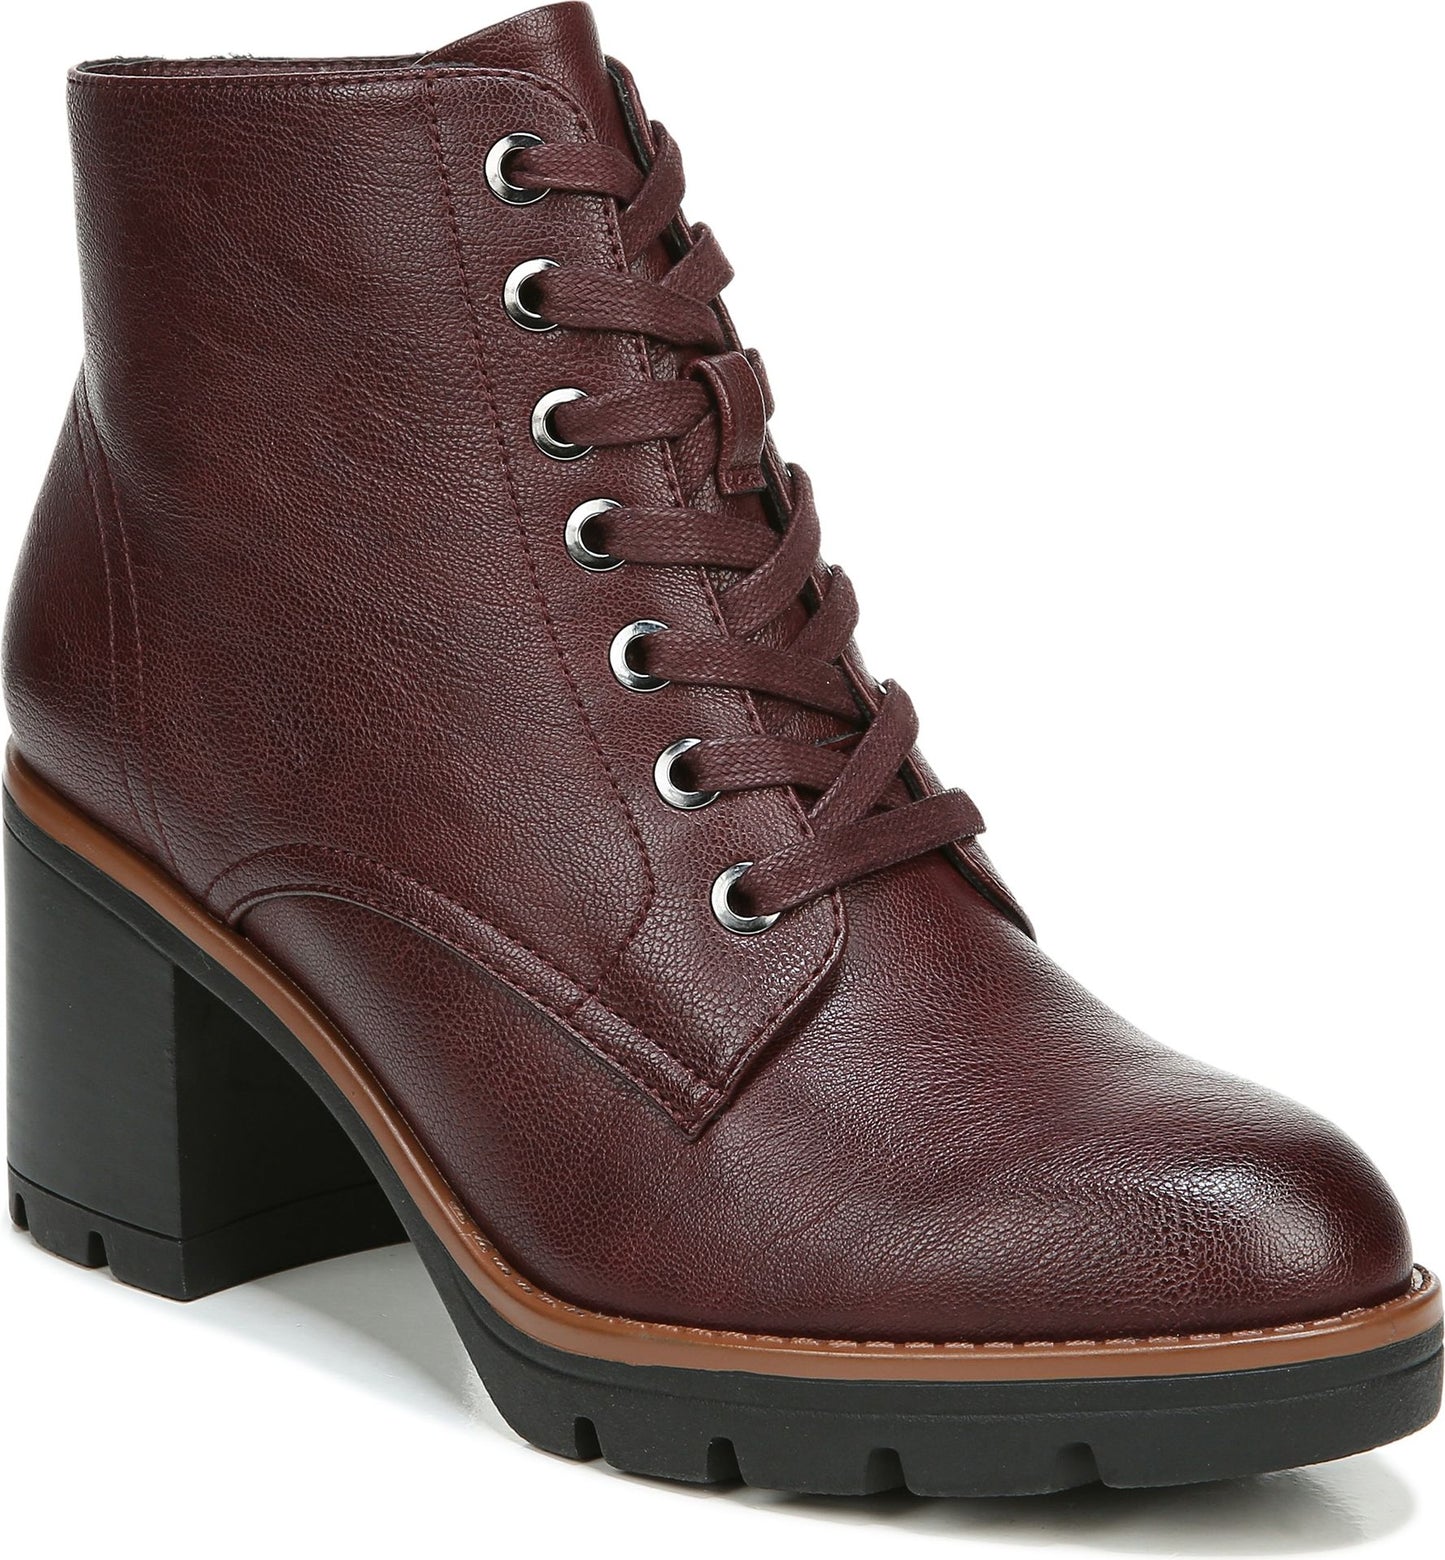 Naturalizer Boots Madalynn Lace Up Bordo - Wide